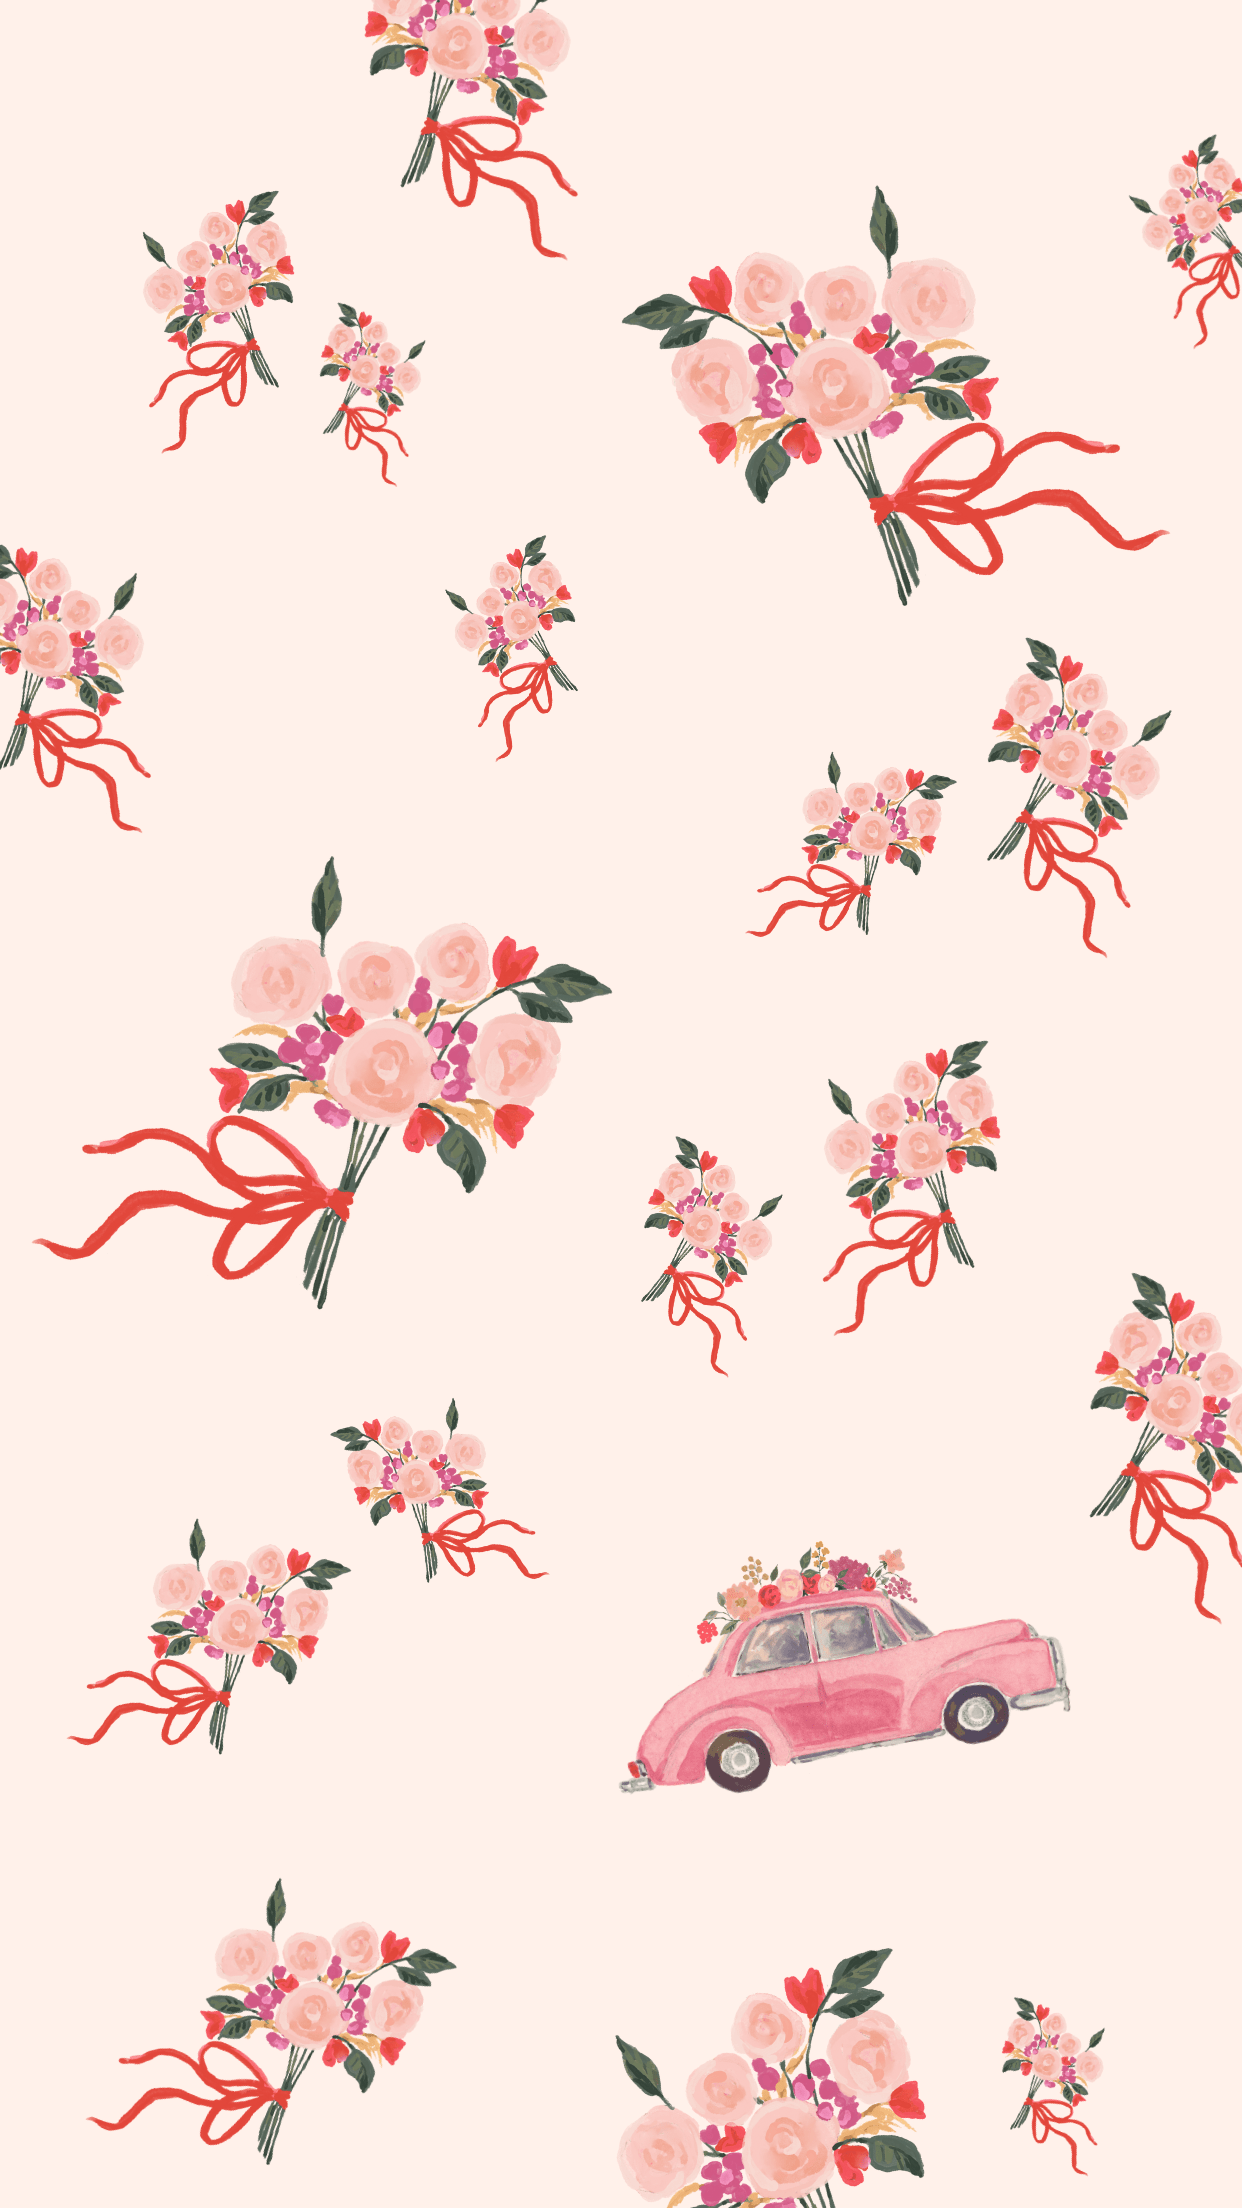 A pattern of pink flowers and a pink car on a pink background - Valentine's Day